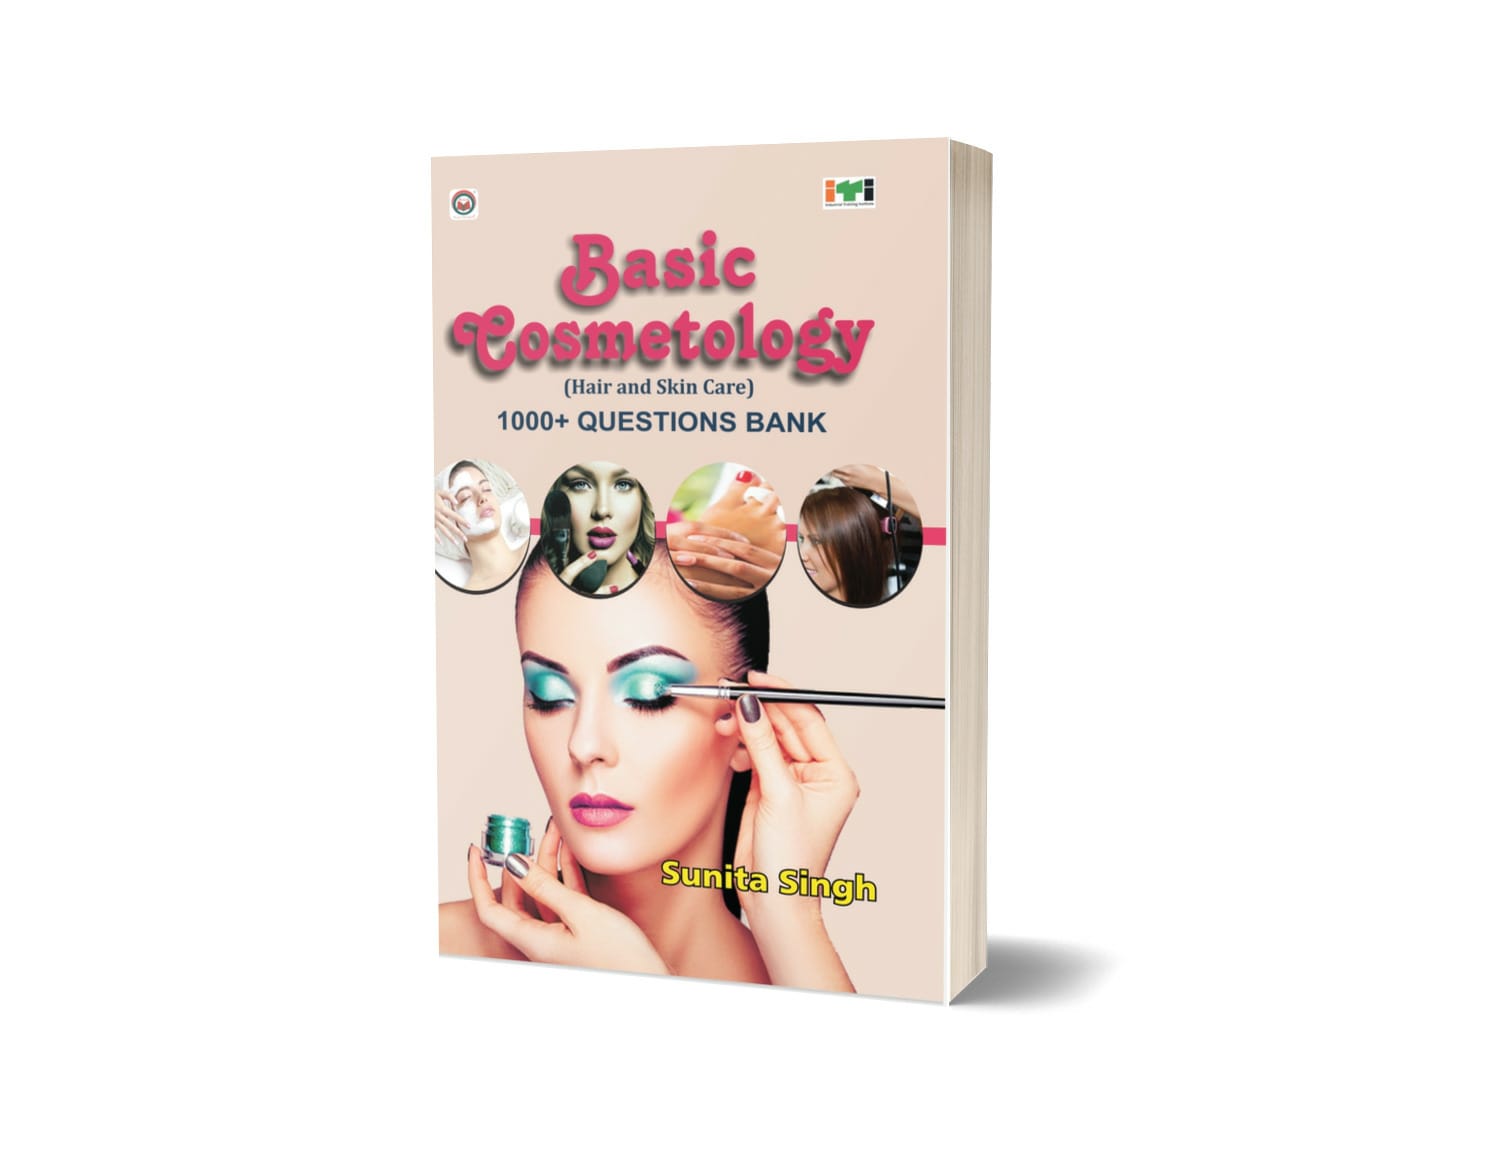 BSIC COSMETOLOGY (HAIR AND SKIN CARE)